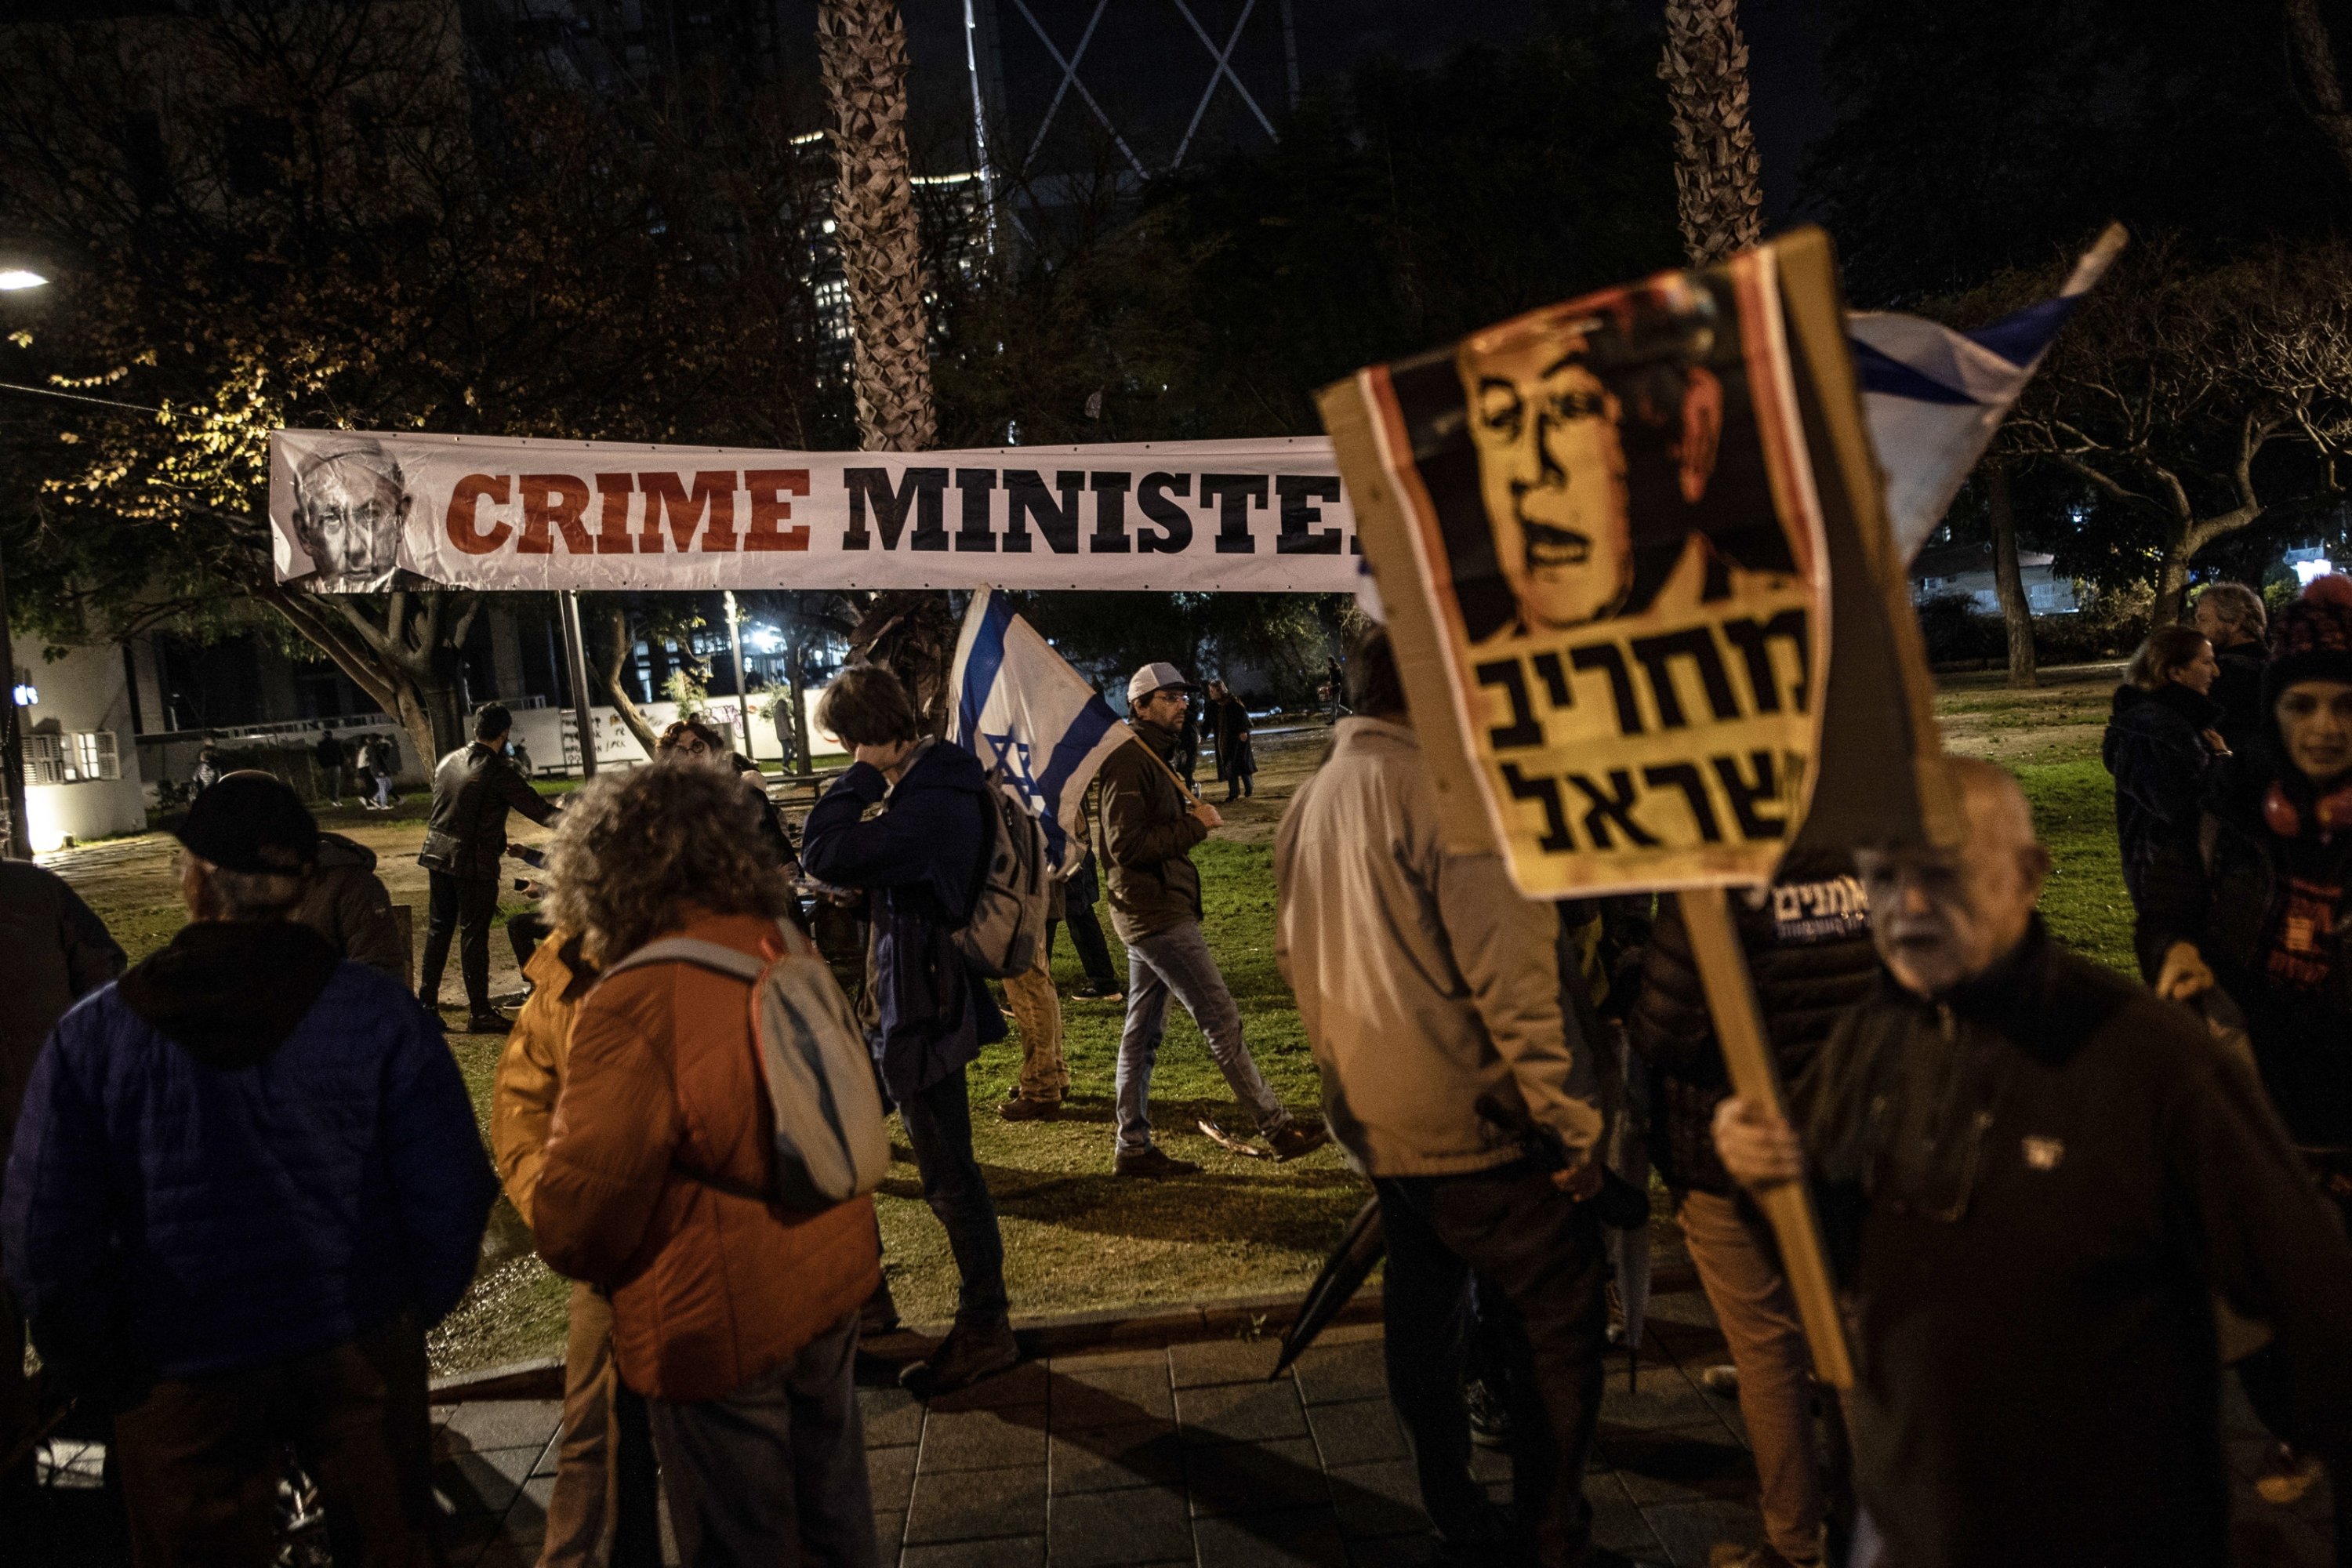 Netanyahu faces growing opposition at home amid mass protests | Daily Sabah